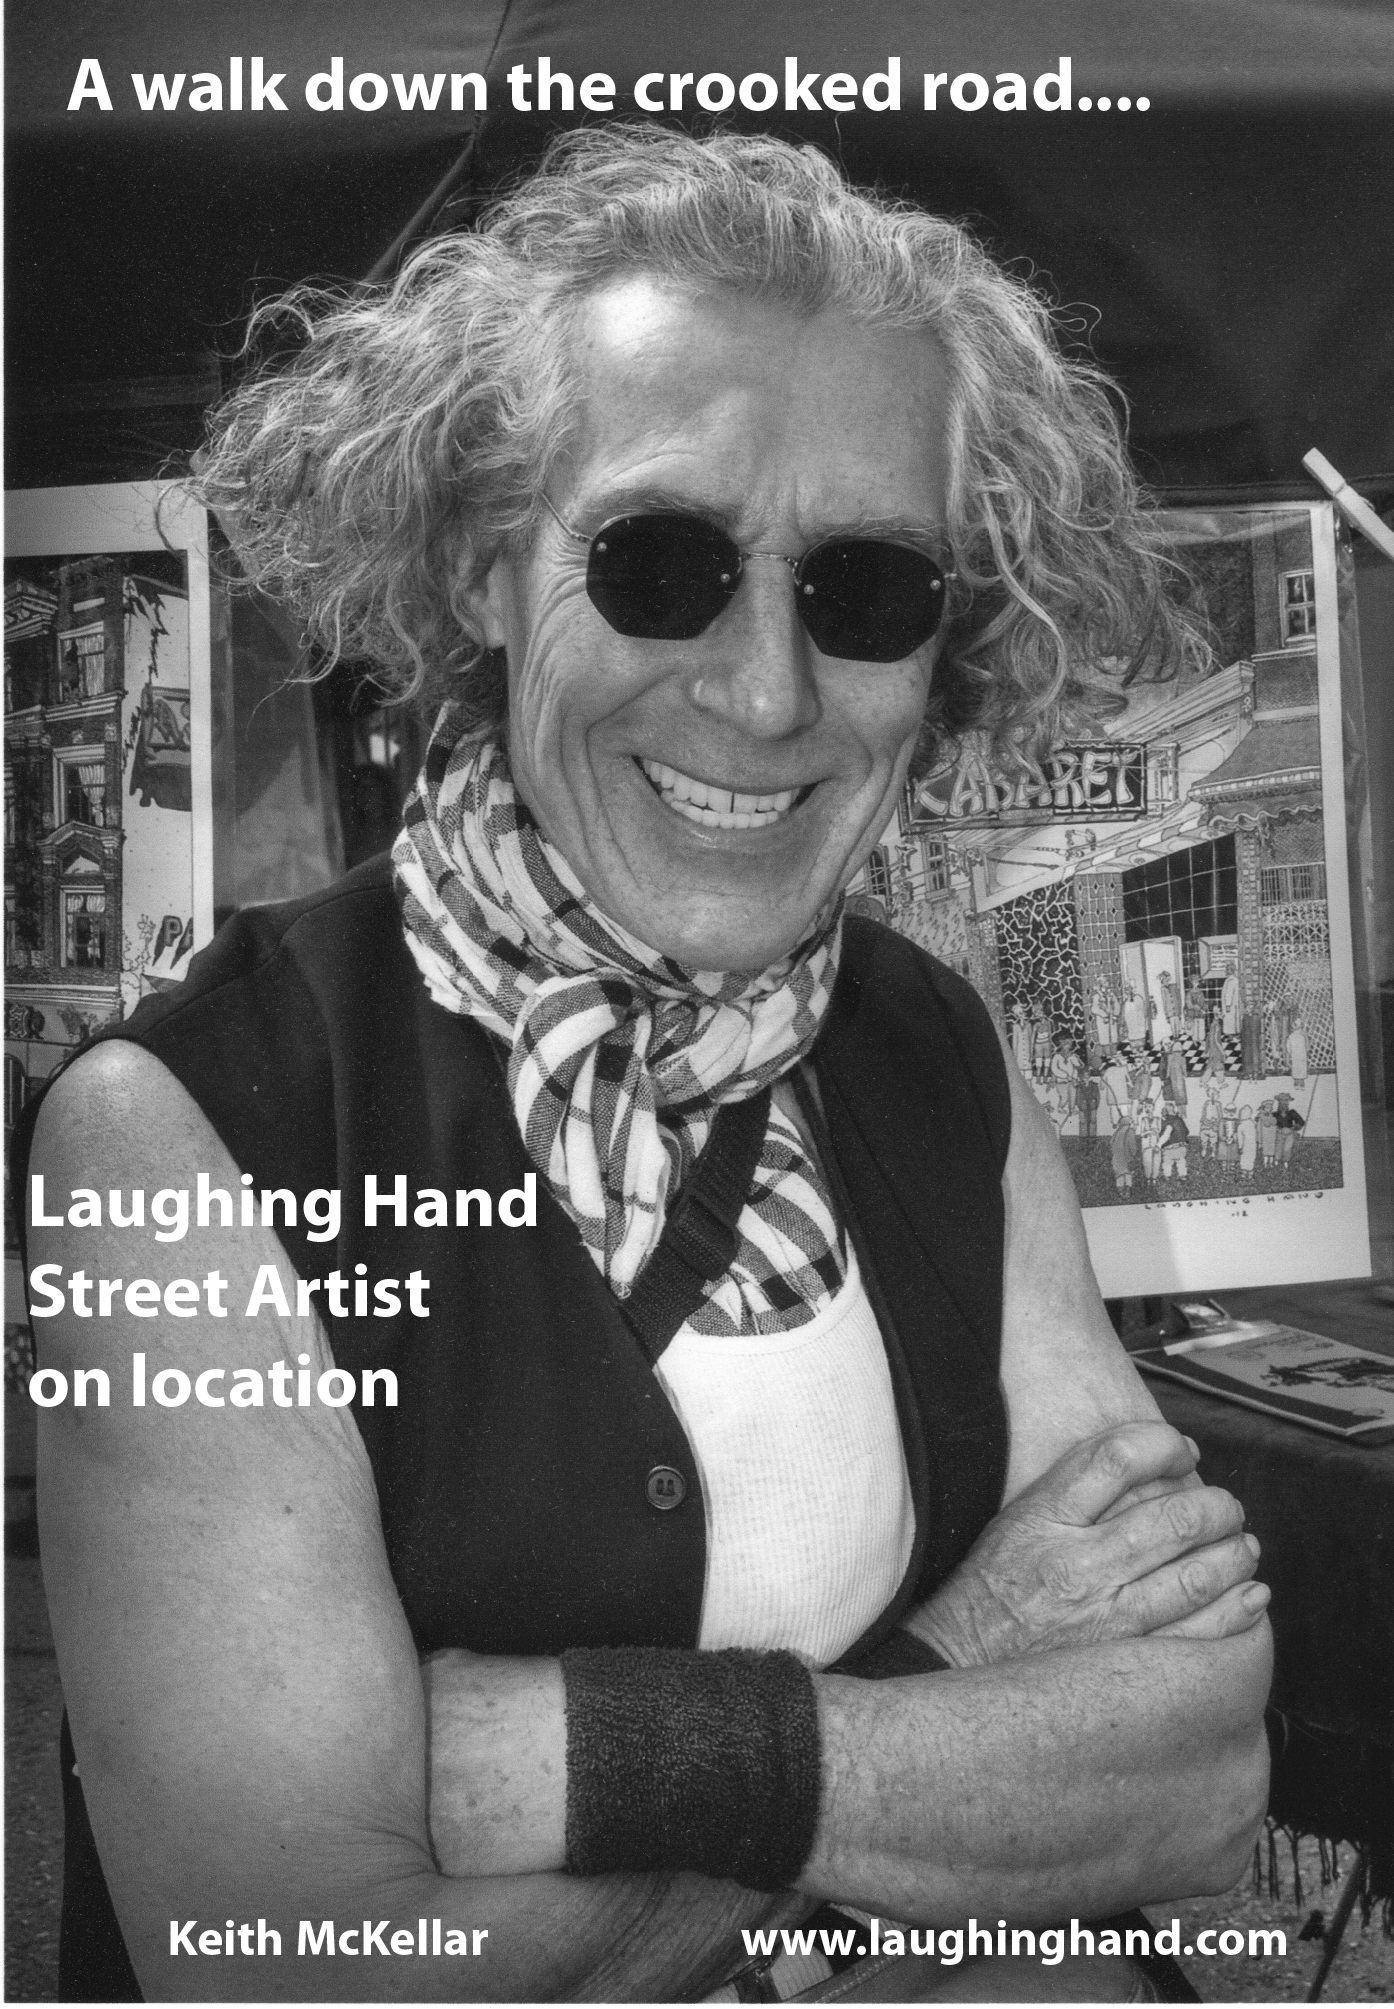 Laughing Hand Street Artist on Location